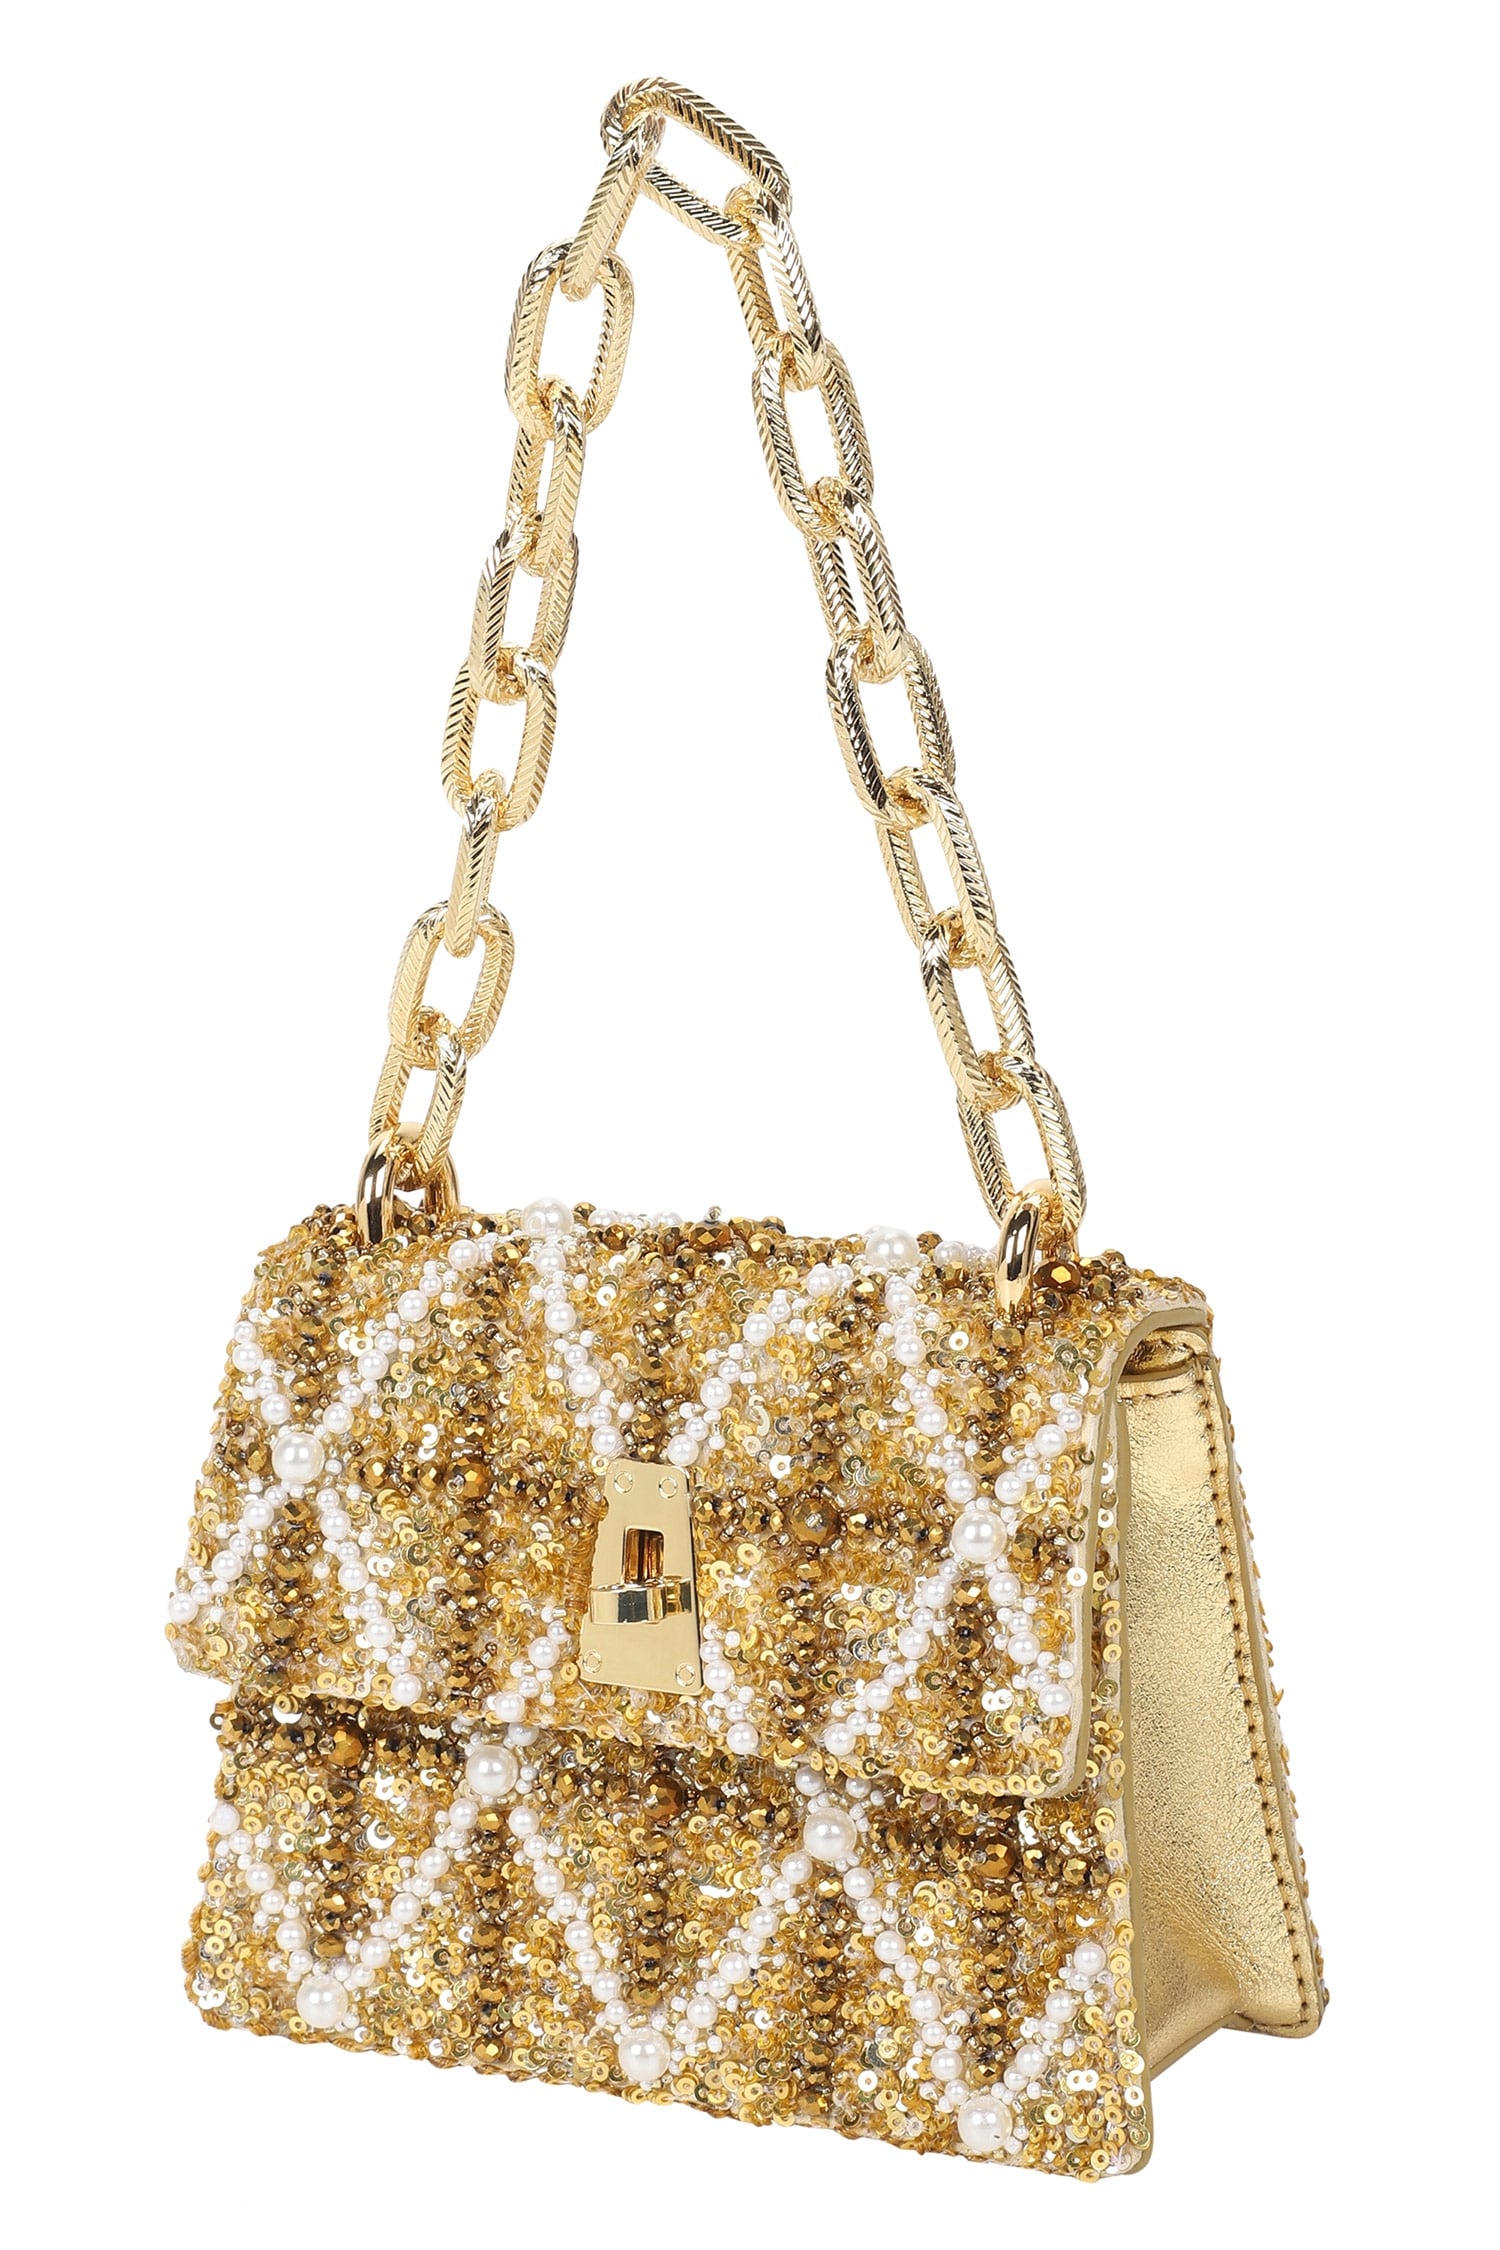 Gold Sequined Evening Clutch Purse | Baginning